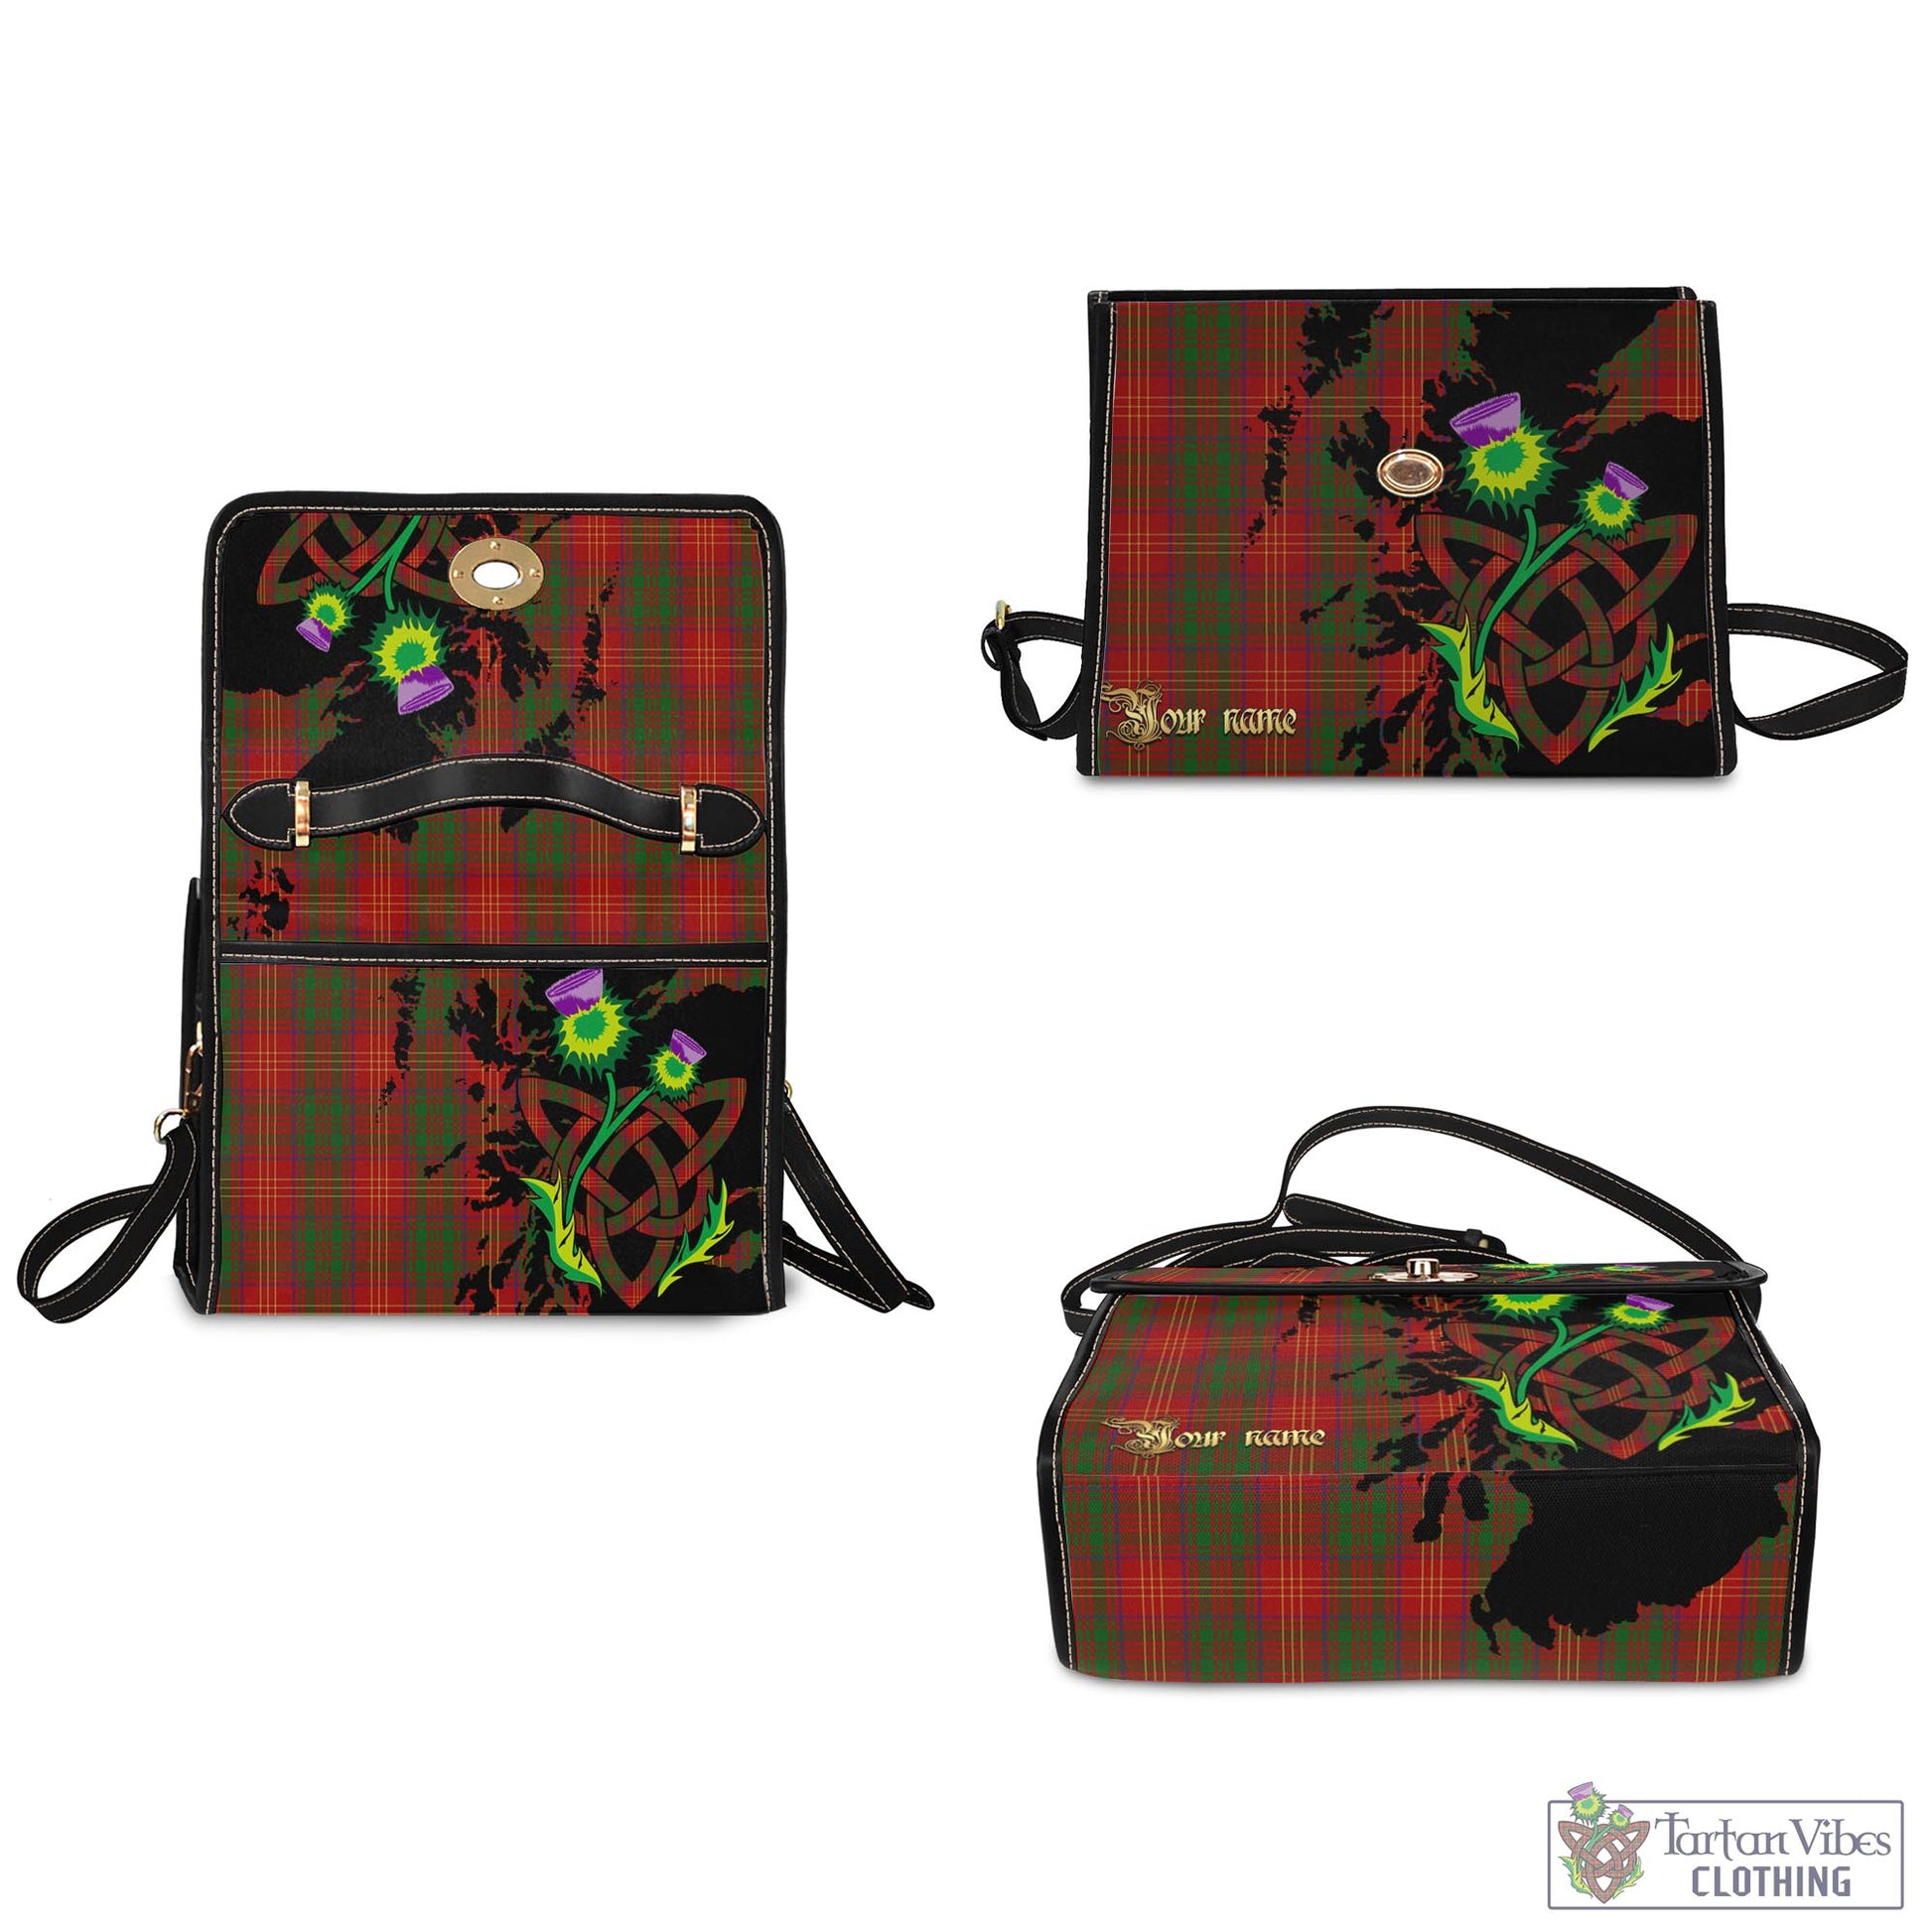 Tartan Vibes Clothing Burns Tartan Waterproof Canvas Bag with Scotland Map and Thistle Celtic Accents